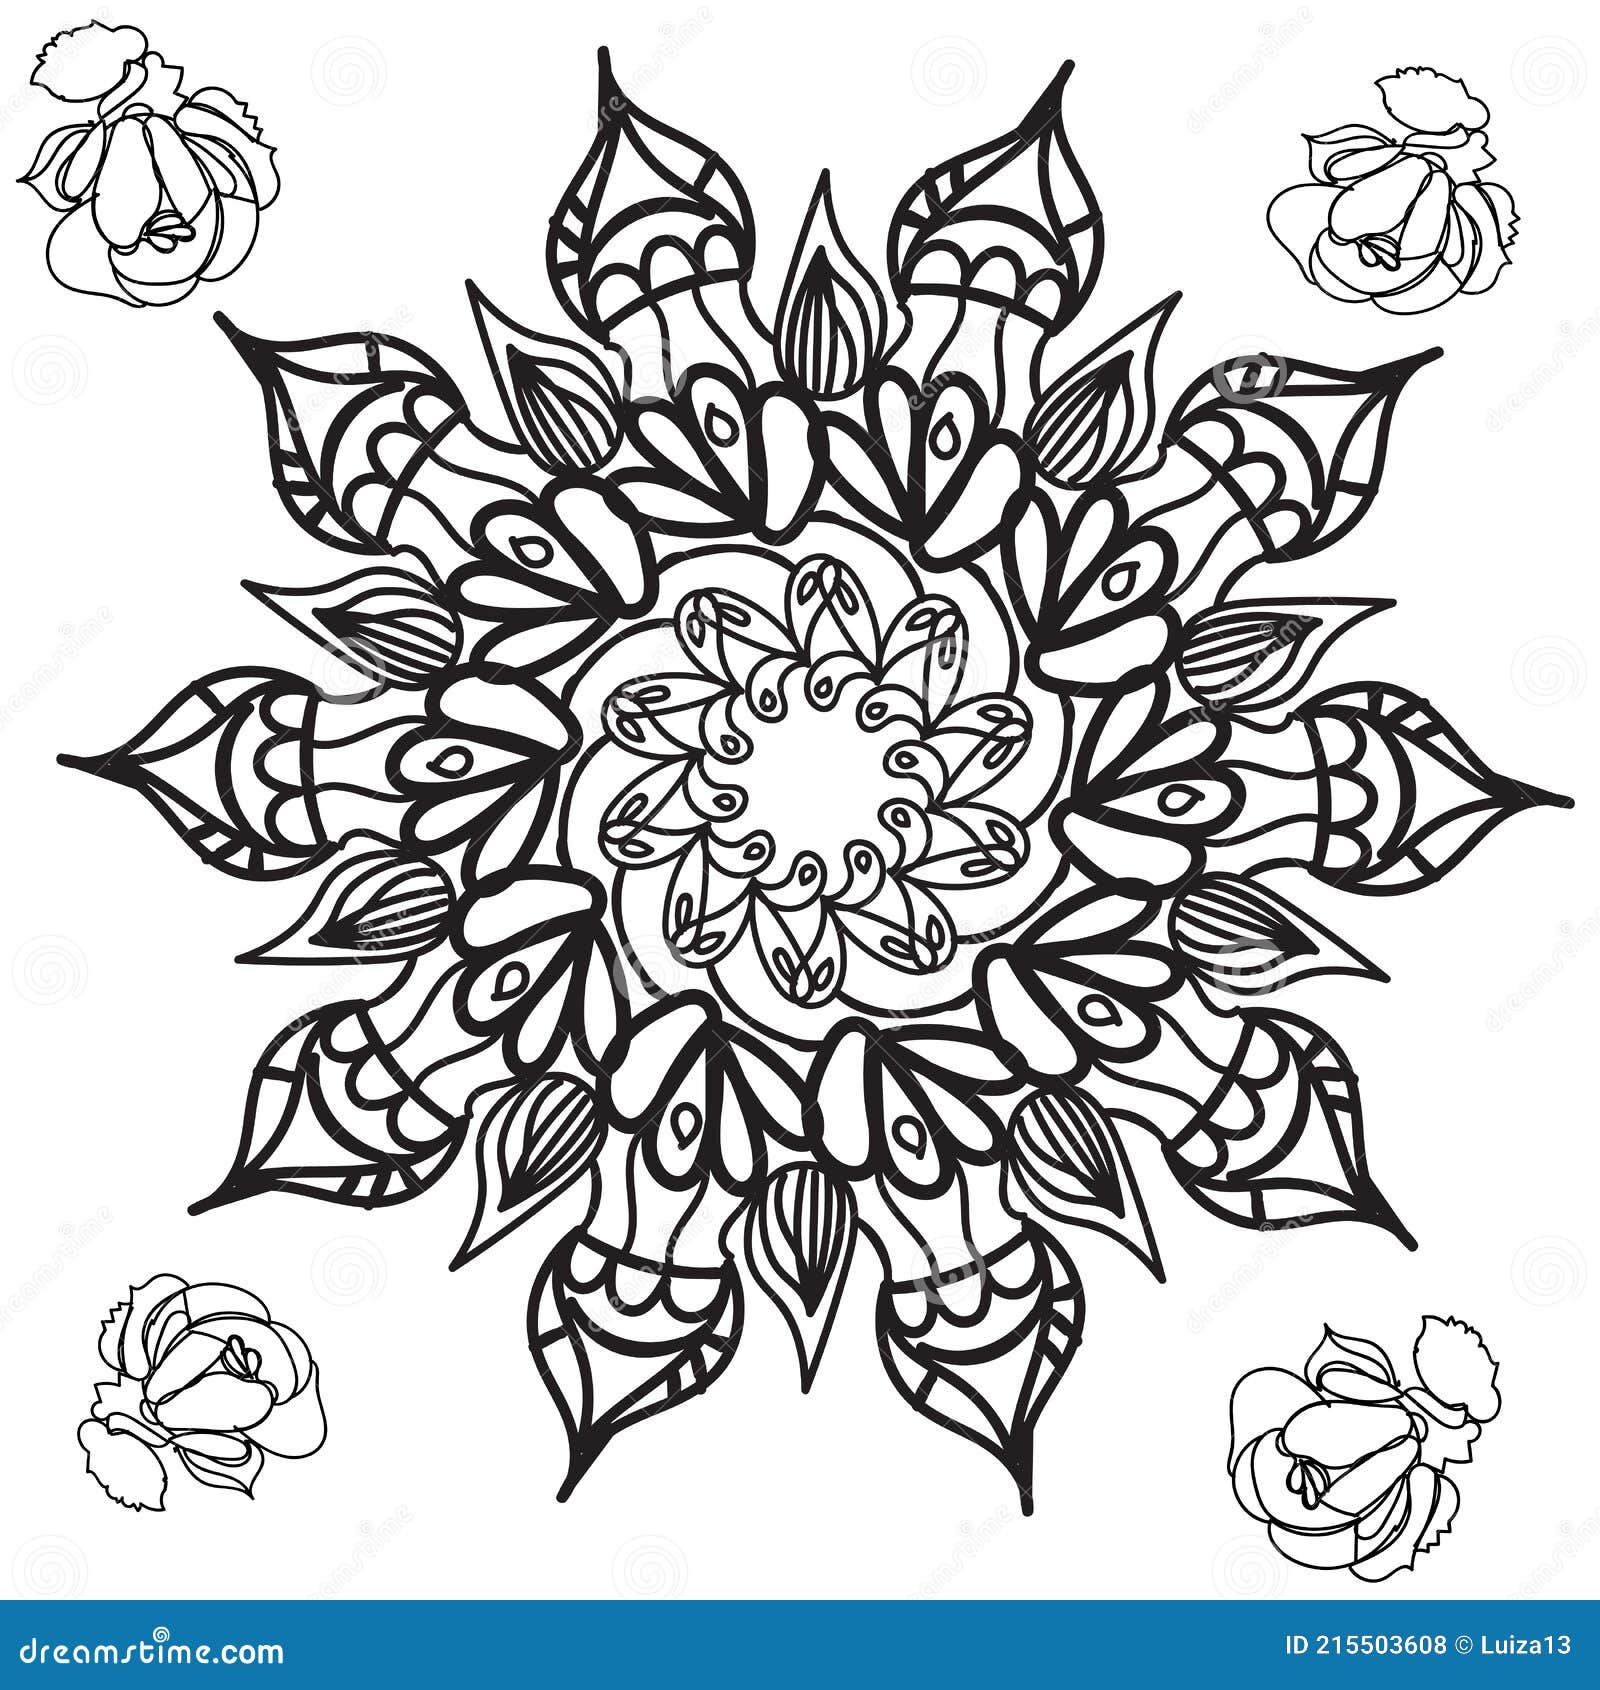 Coloring page with mandala and roses for adult coloring book hand drawn illustration stock vector